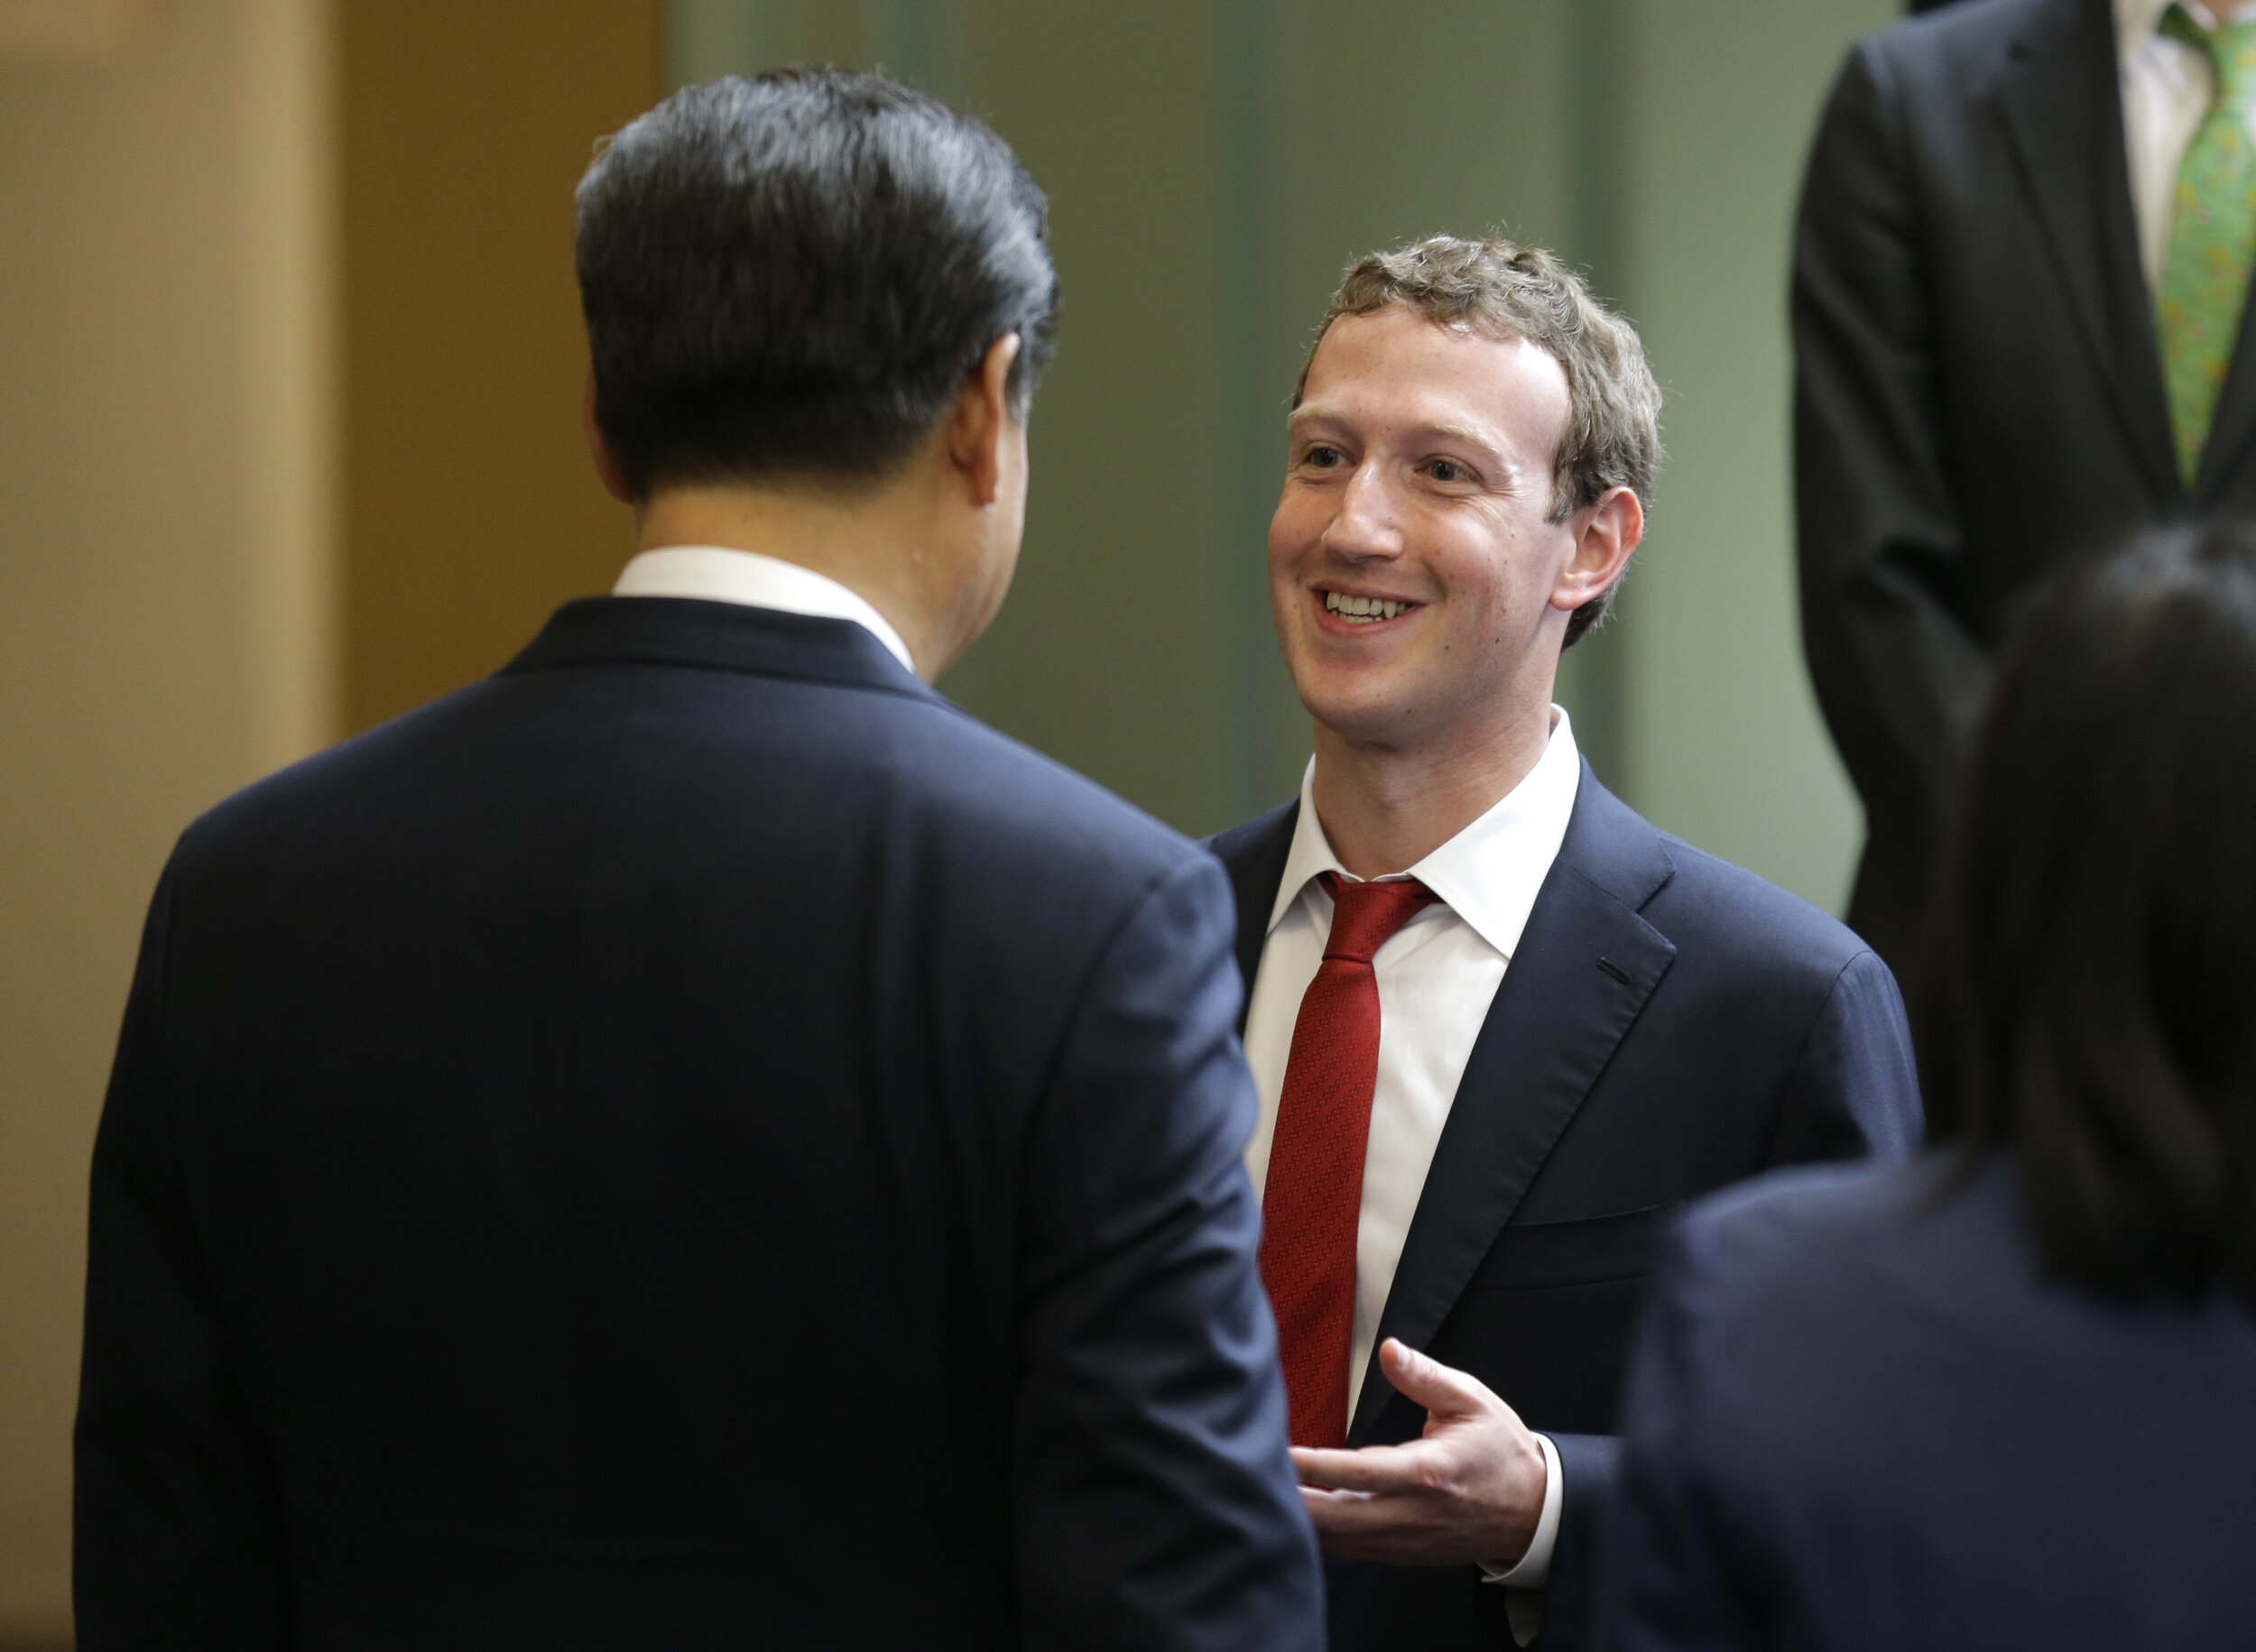  That obsession has continued to this day. The obsequious look in Mark Zuckerberg’s face as he glad-hands China’s Communist Party boss, Xi Jinping, at the White House in 2015, speaks volumes. Facebook is still banned in China.  